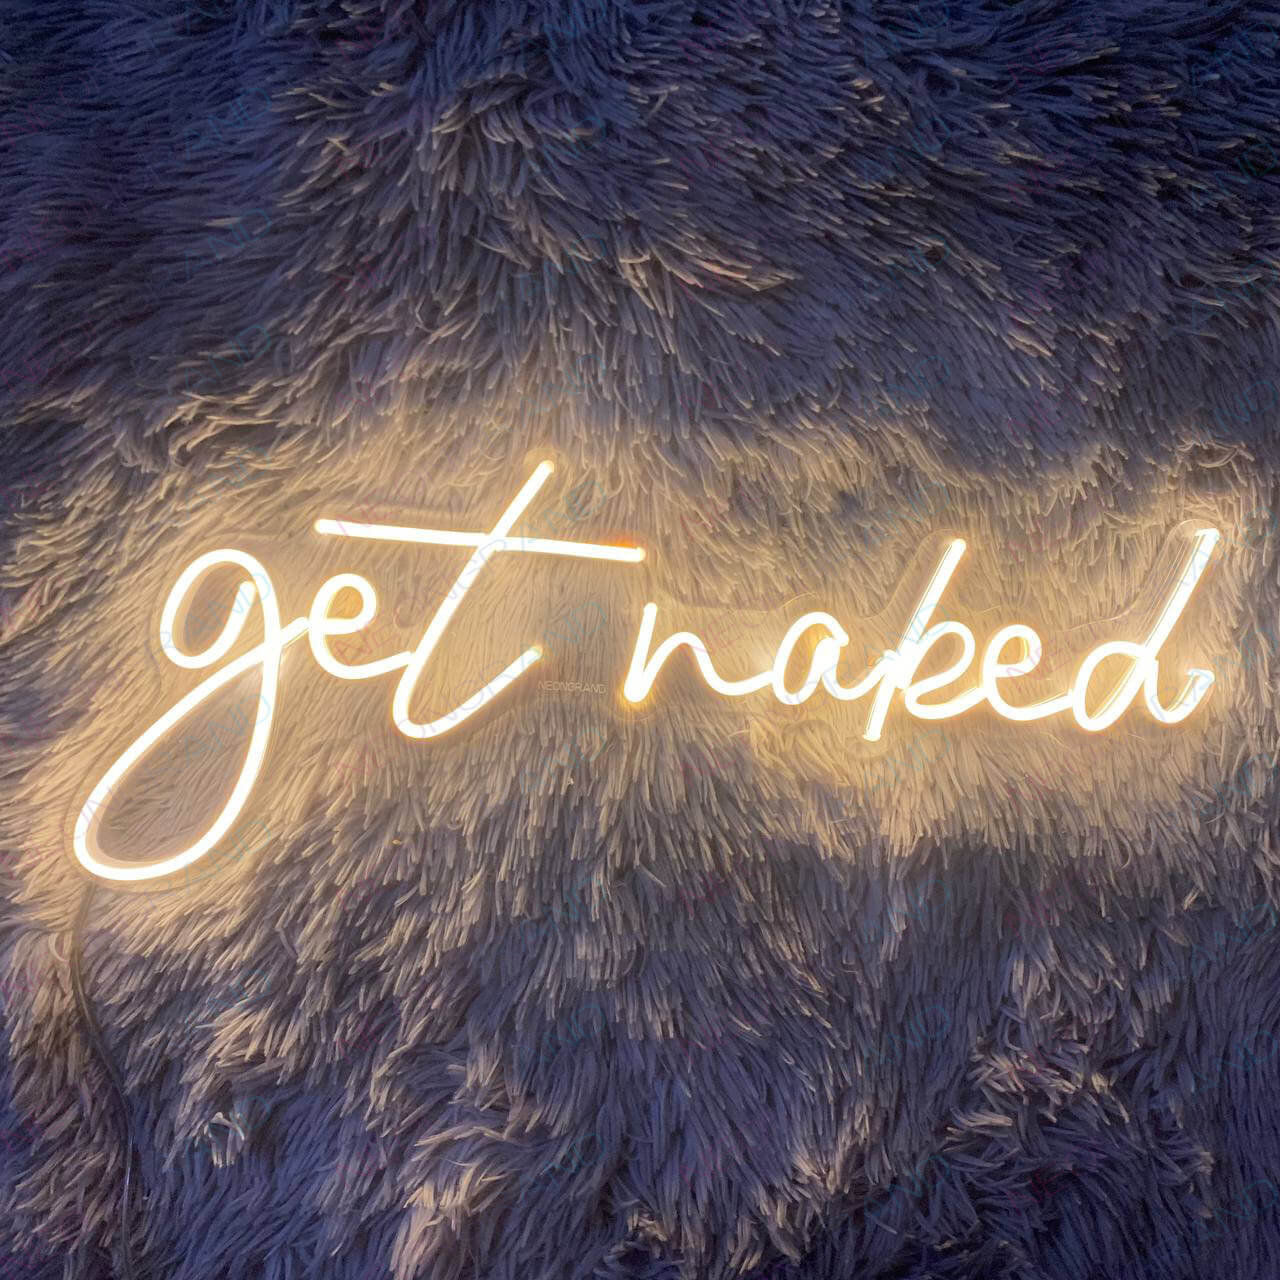 Get Naked Neon Sign Sexy Led Light gold yl wm